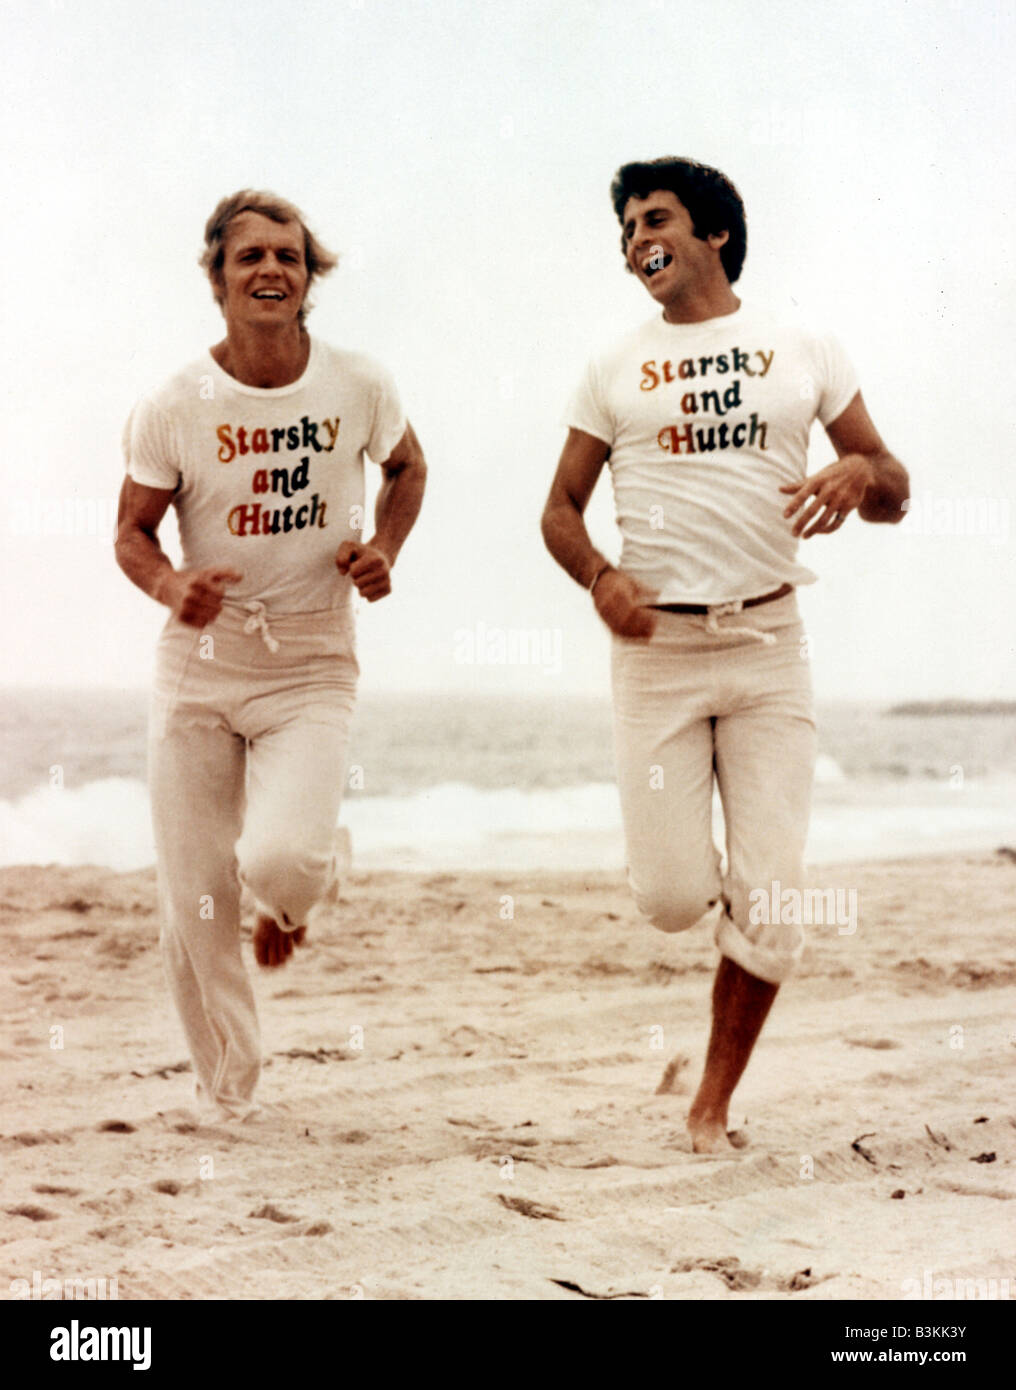 STARSKY AND HUTCH  US TV series 1975-79 with Paul Michael Glaser at right as Starskey and David Soul as Hutch Stock Photo